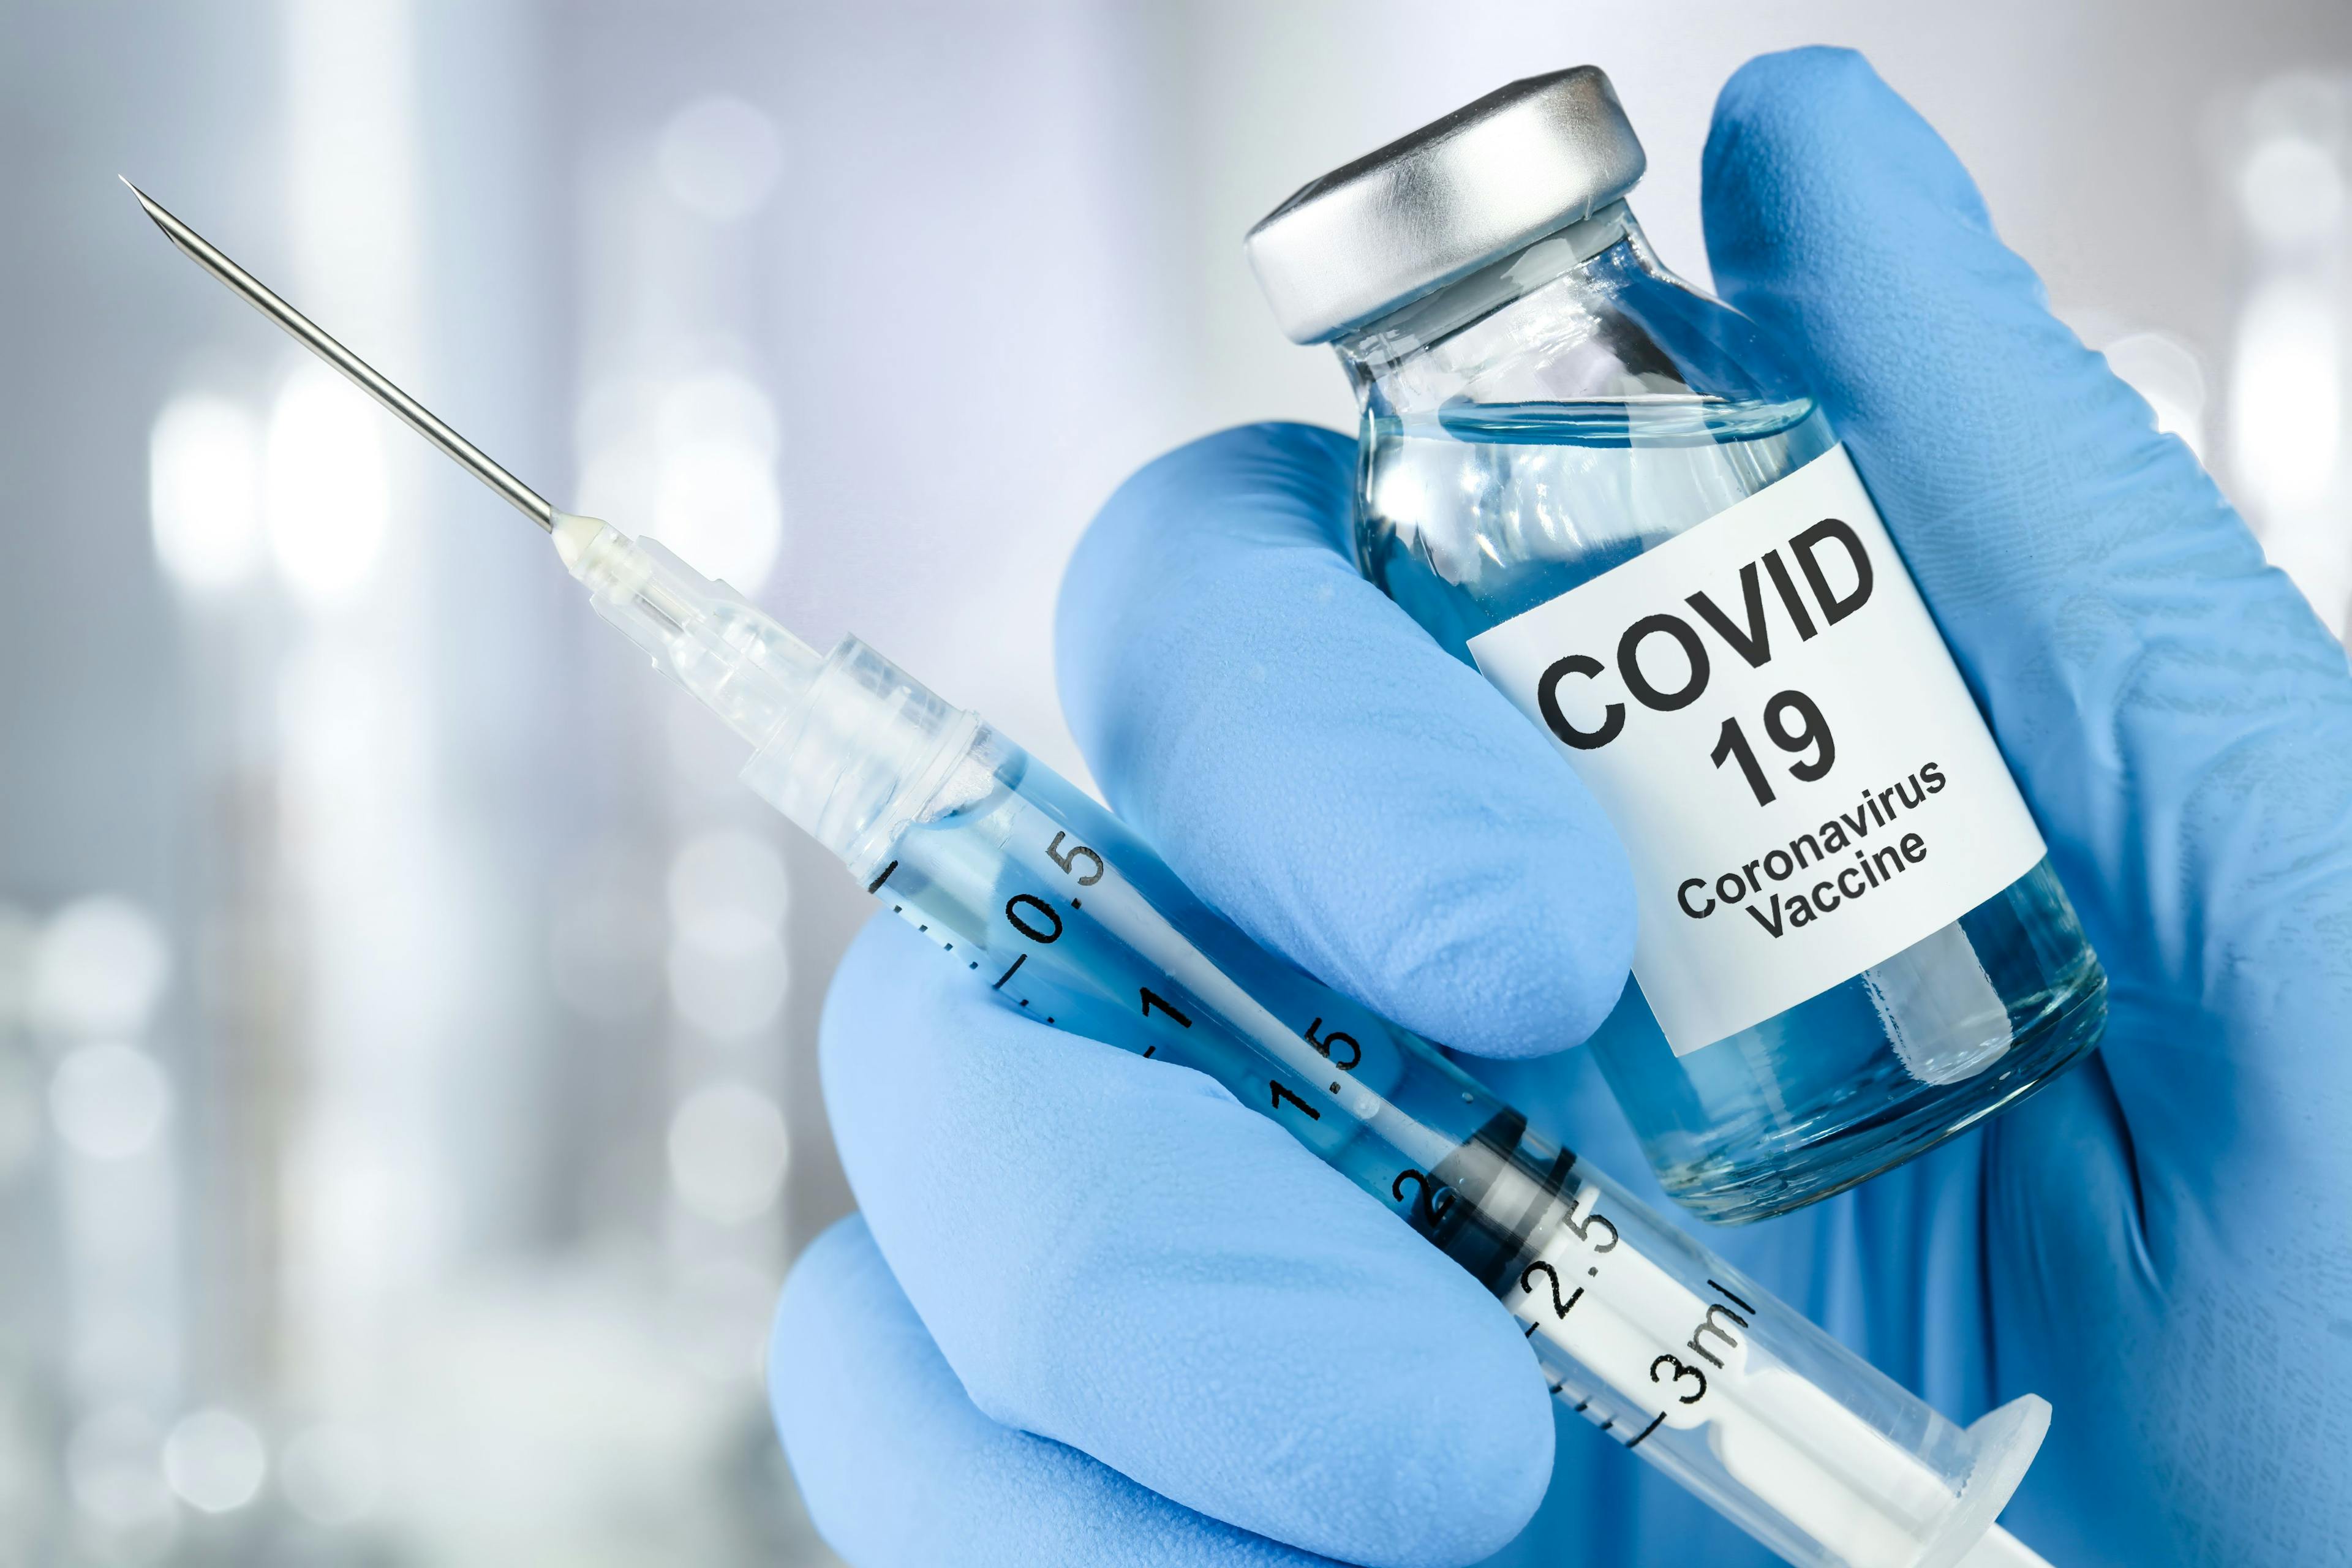 Pfizer COVID-19 vaccine results positive, but questions remain